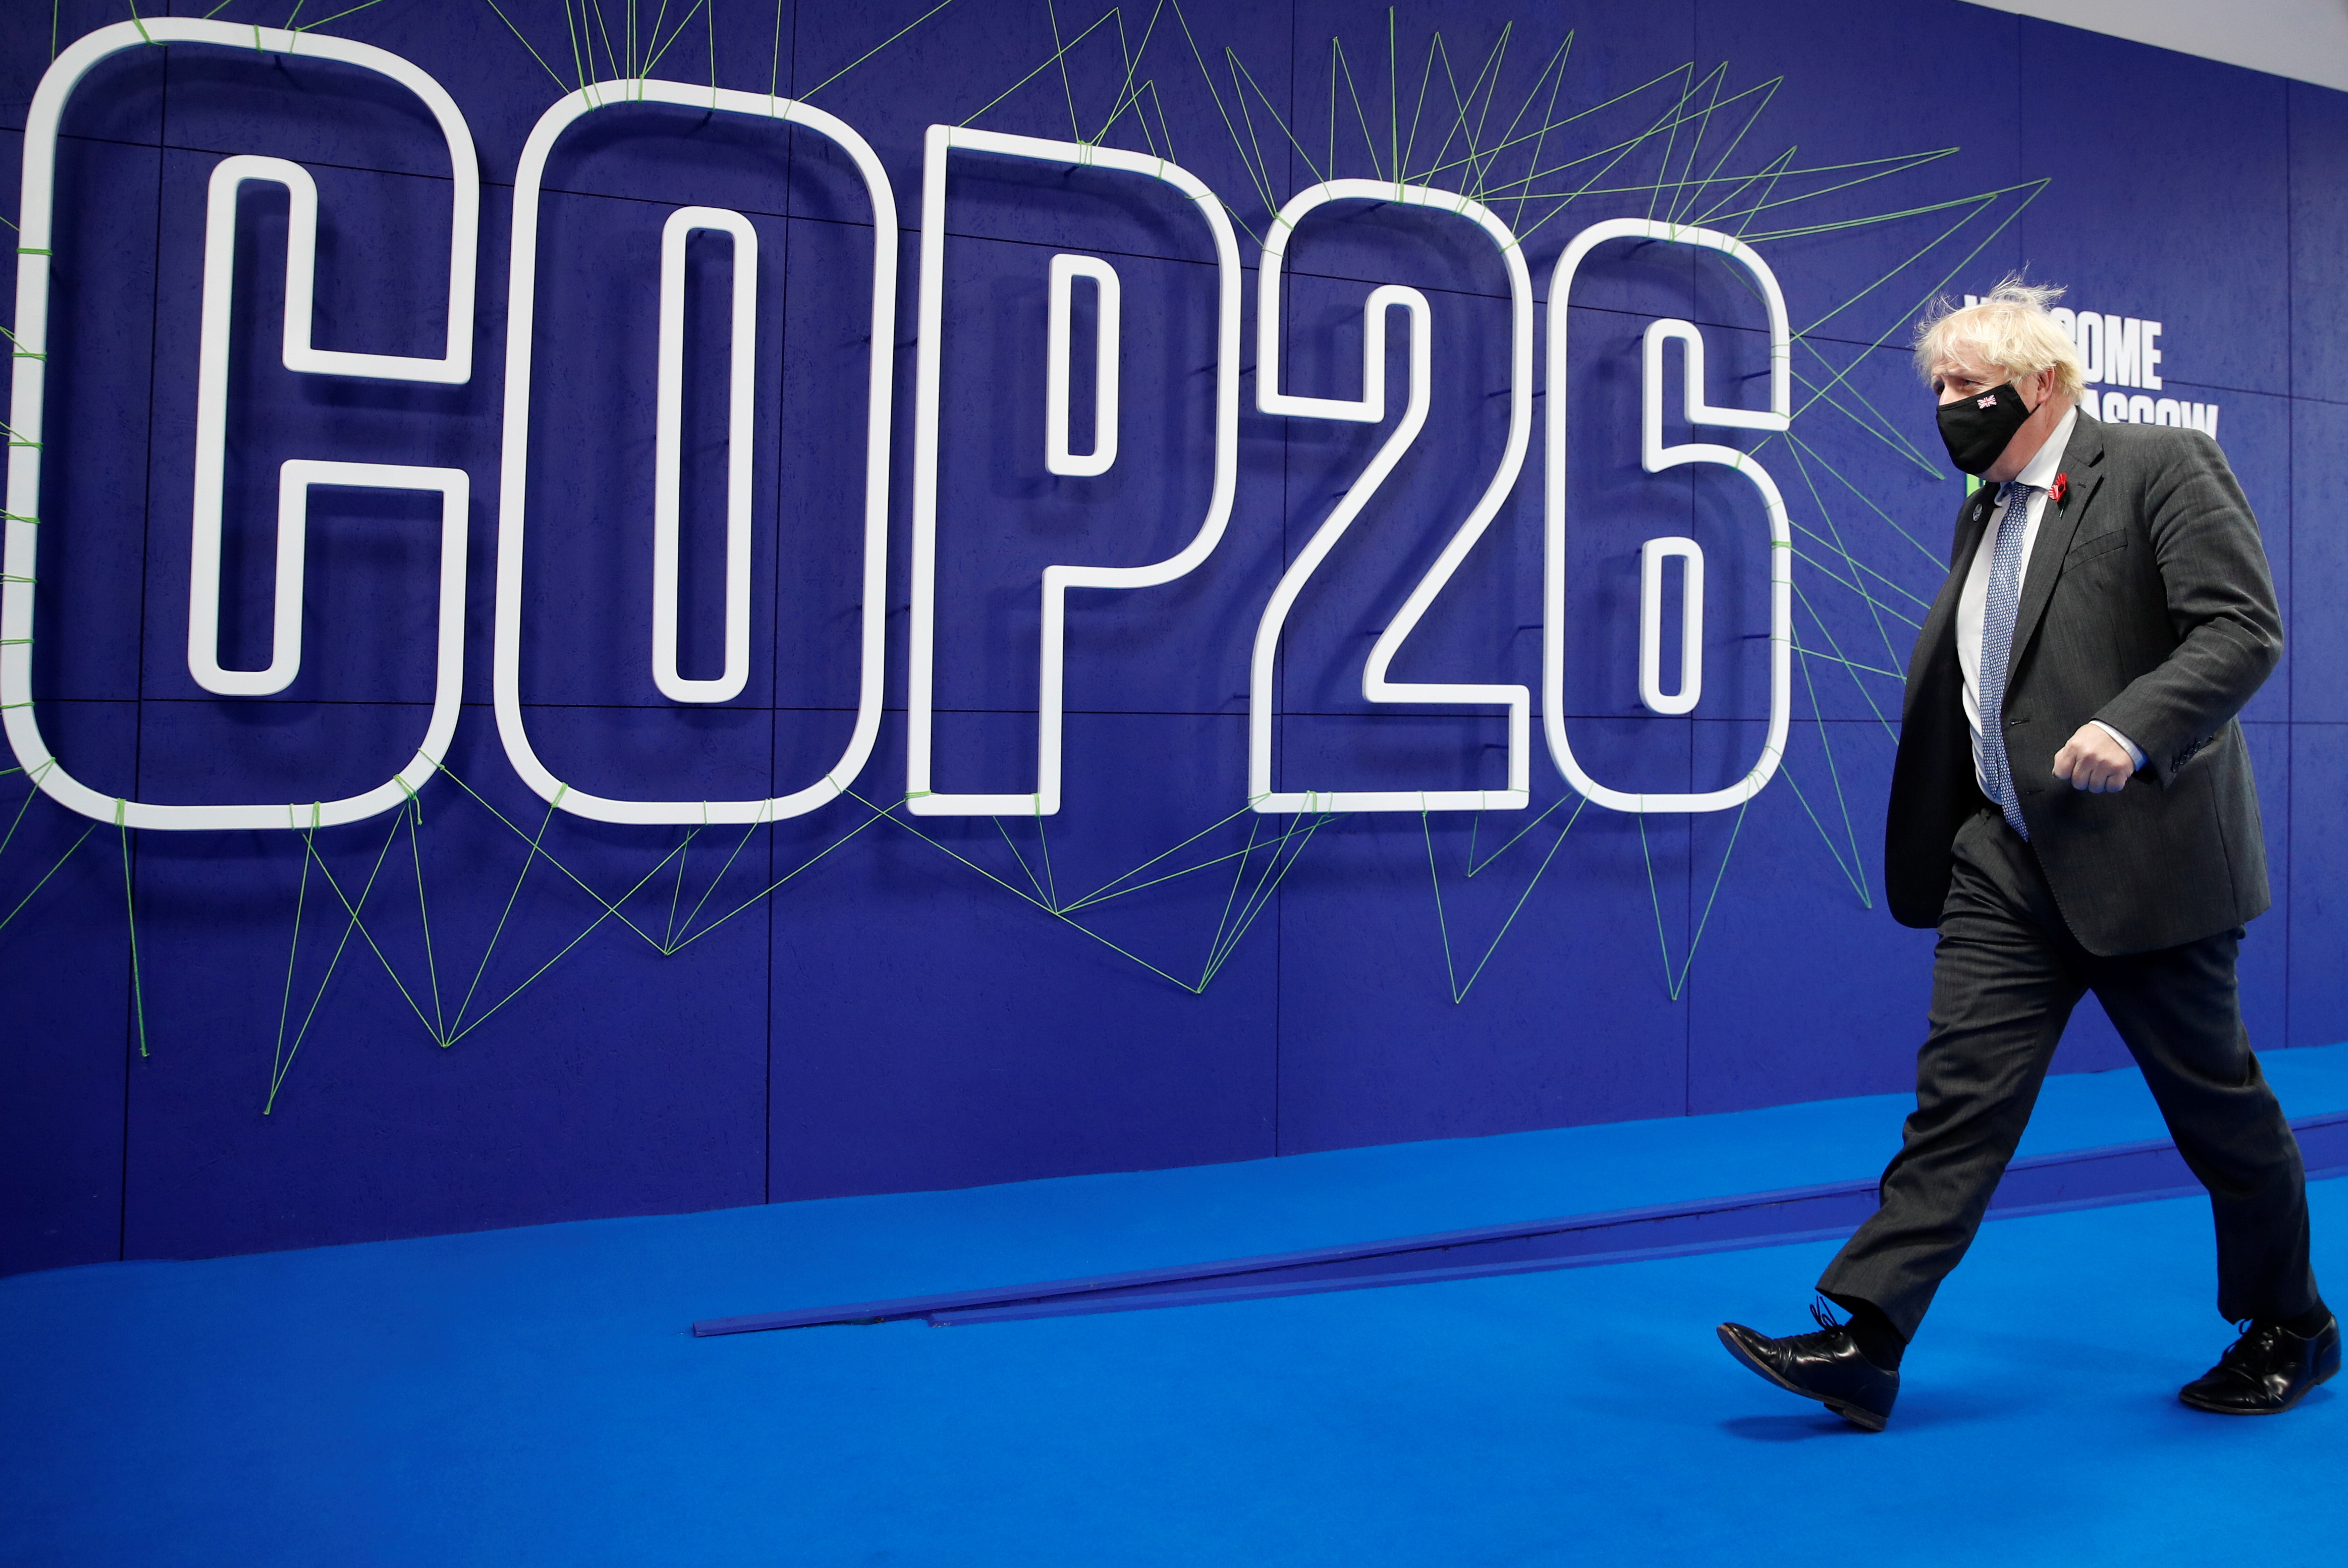 Climate Activists Claim COP26 Reached New Levels Of Petty In An Attempt To Shut Them Down